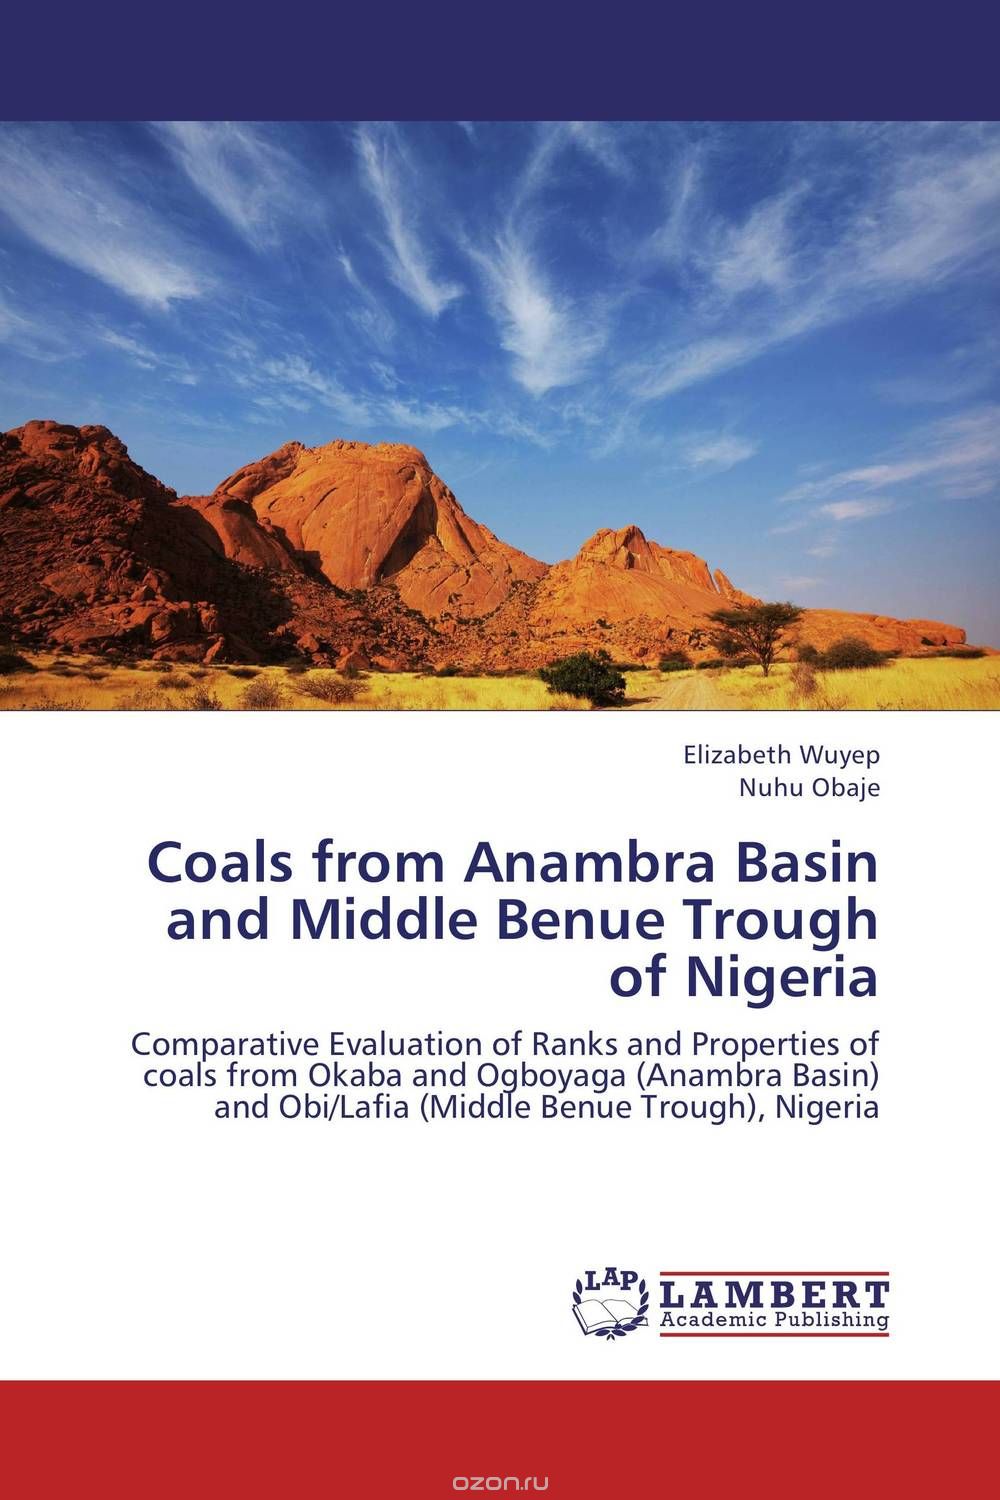 Скачать книгу "Coals from Anambra Basin and Middle Benue Trough of Nigeria"